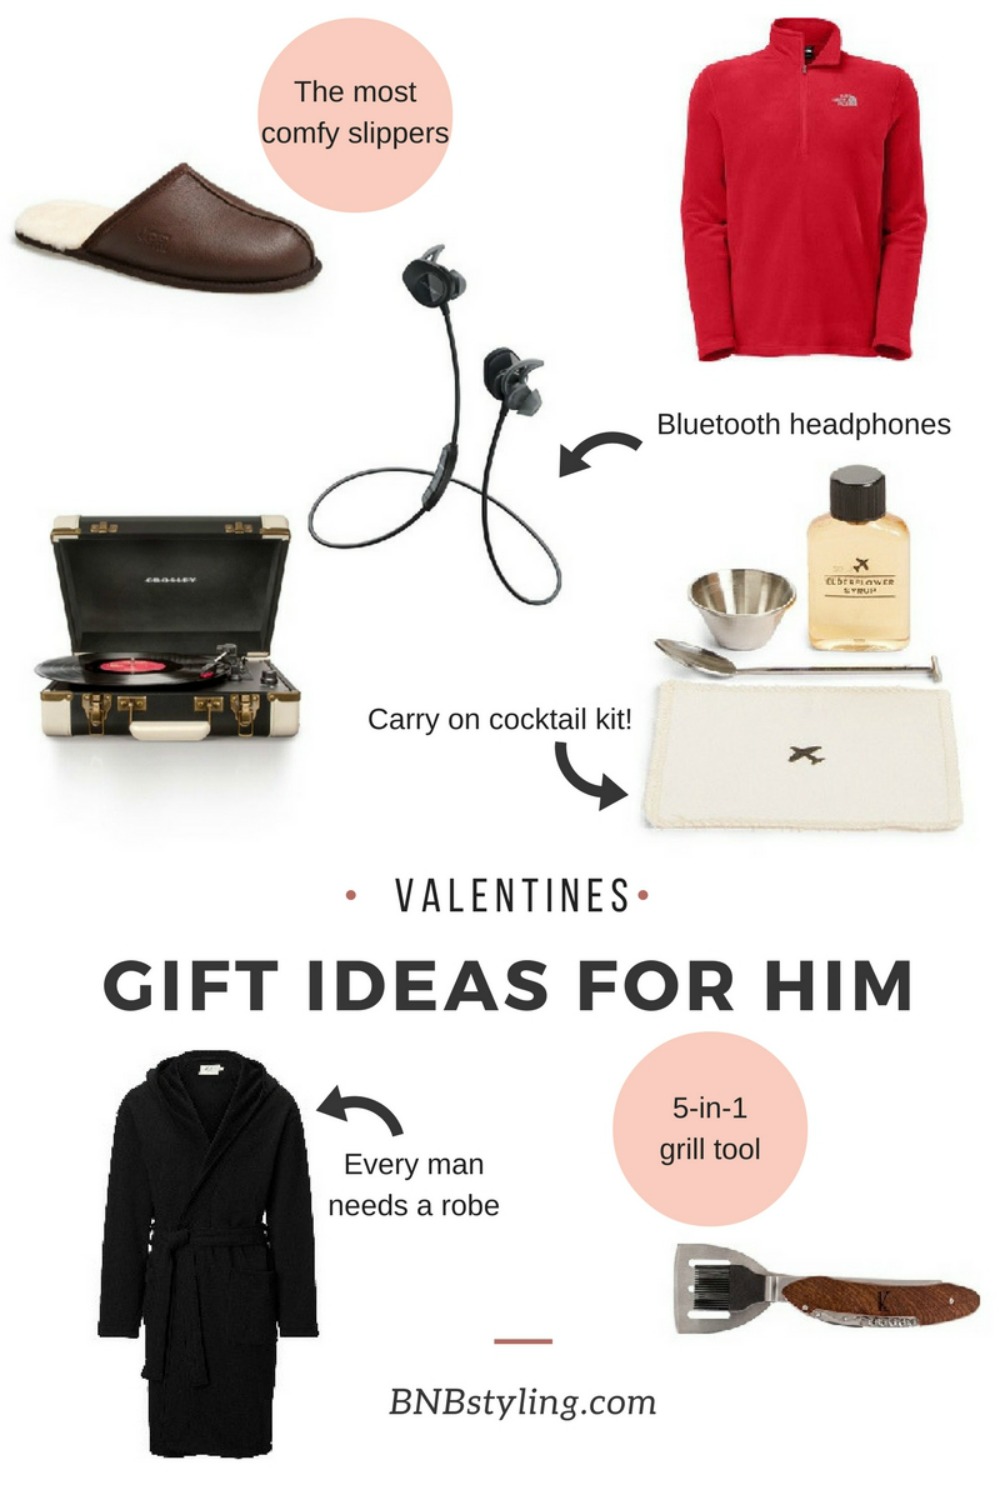 Valentines gift ideas for him